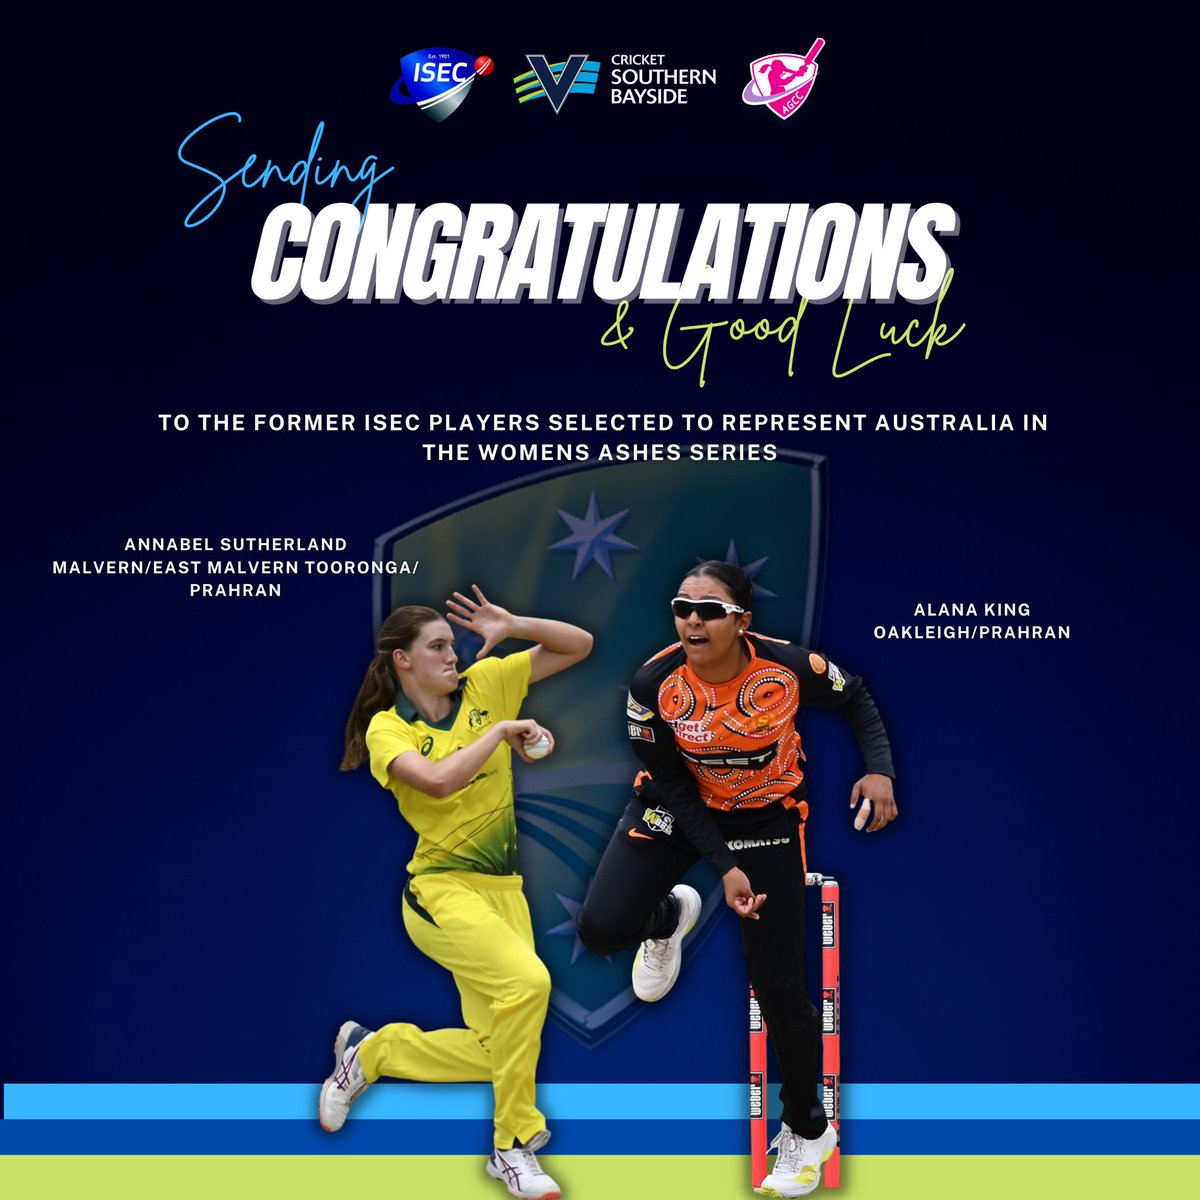 Congratulations to two former ISEC players that have been selected to represent Australia in the Womens Ashes Series, which began in emphatic style last night! Wishing them all the best for the series 💪!